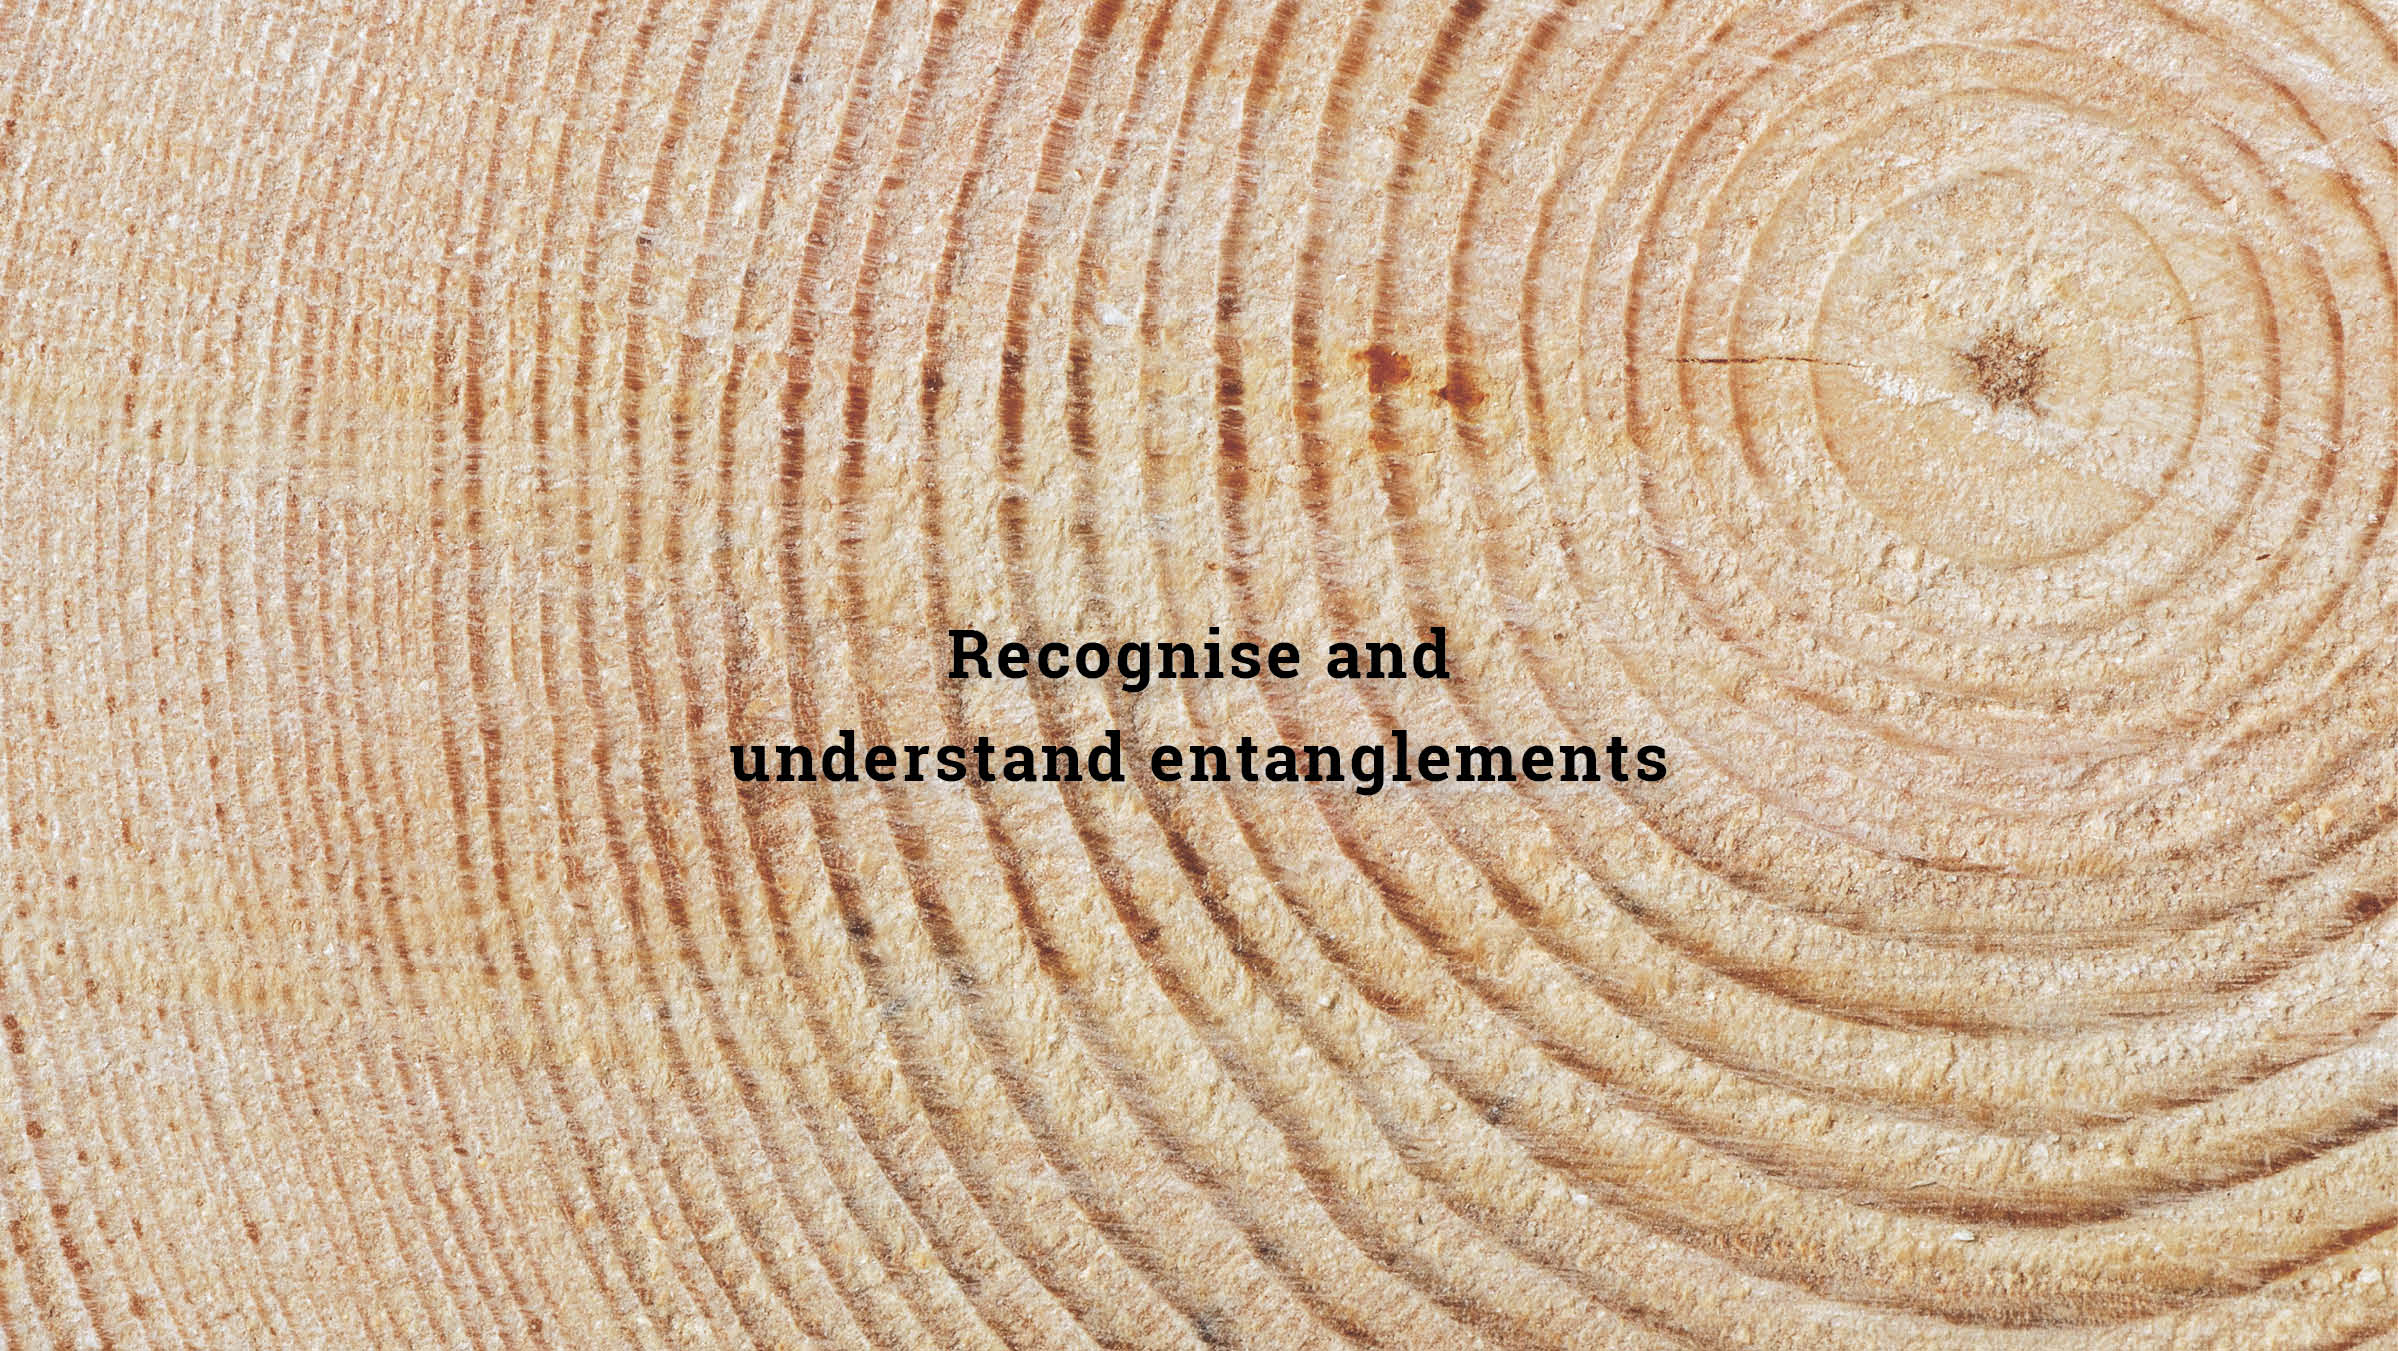 Recognise and understand entanglements